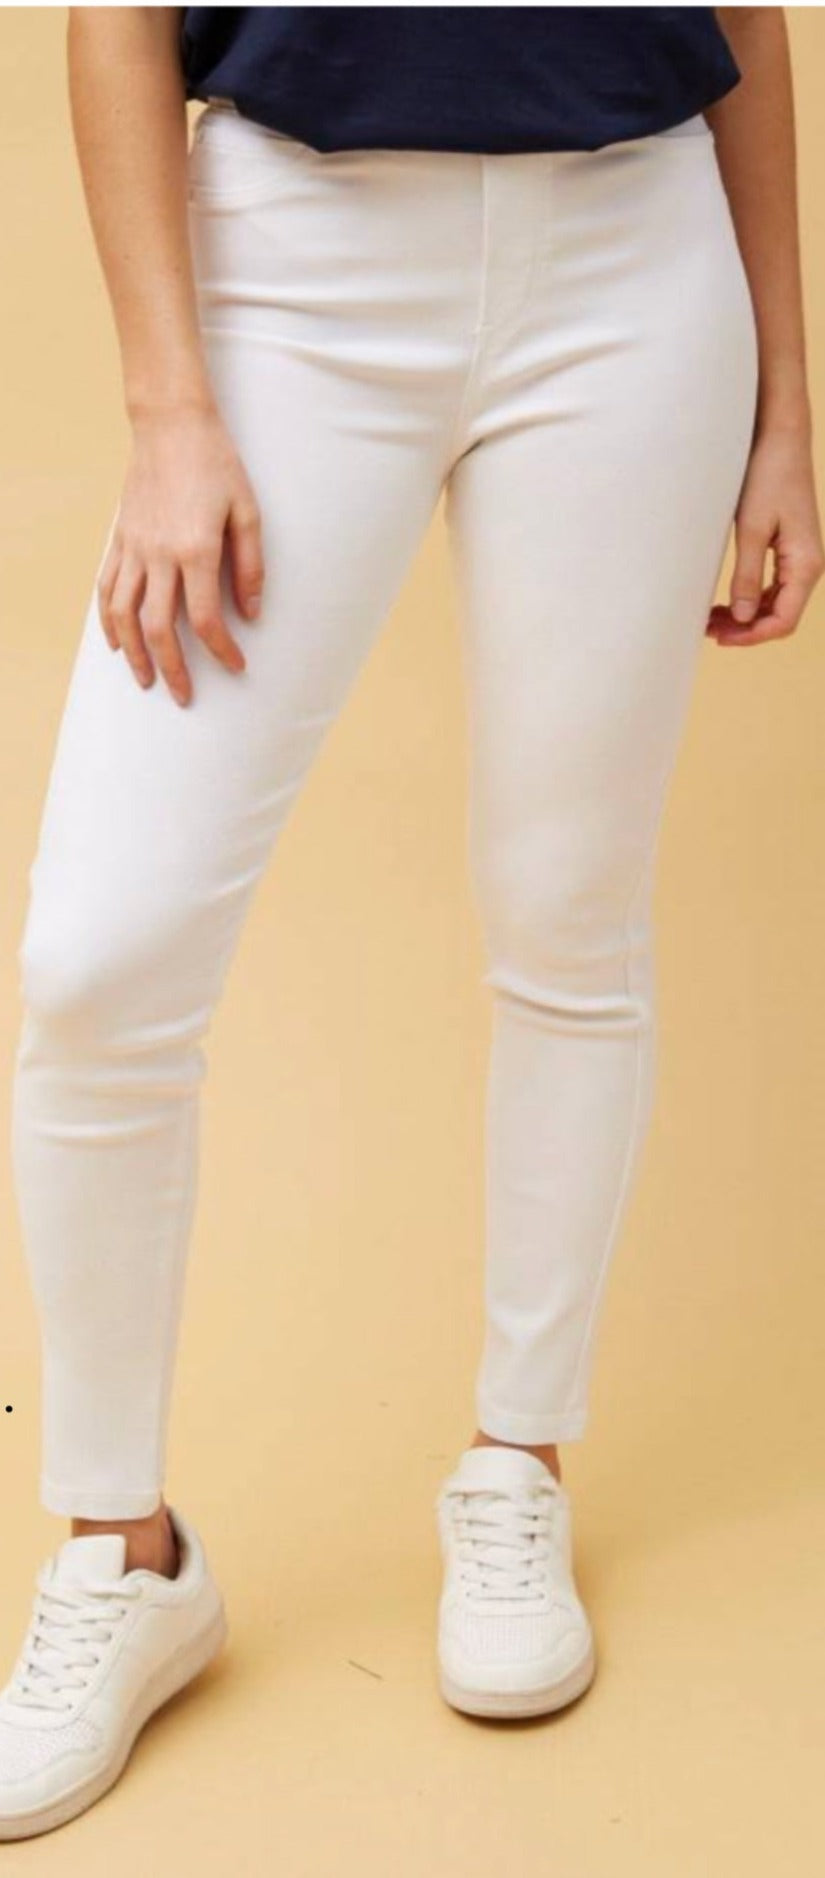 woman wearing white jeggings and white shows